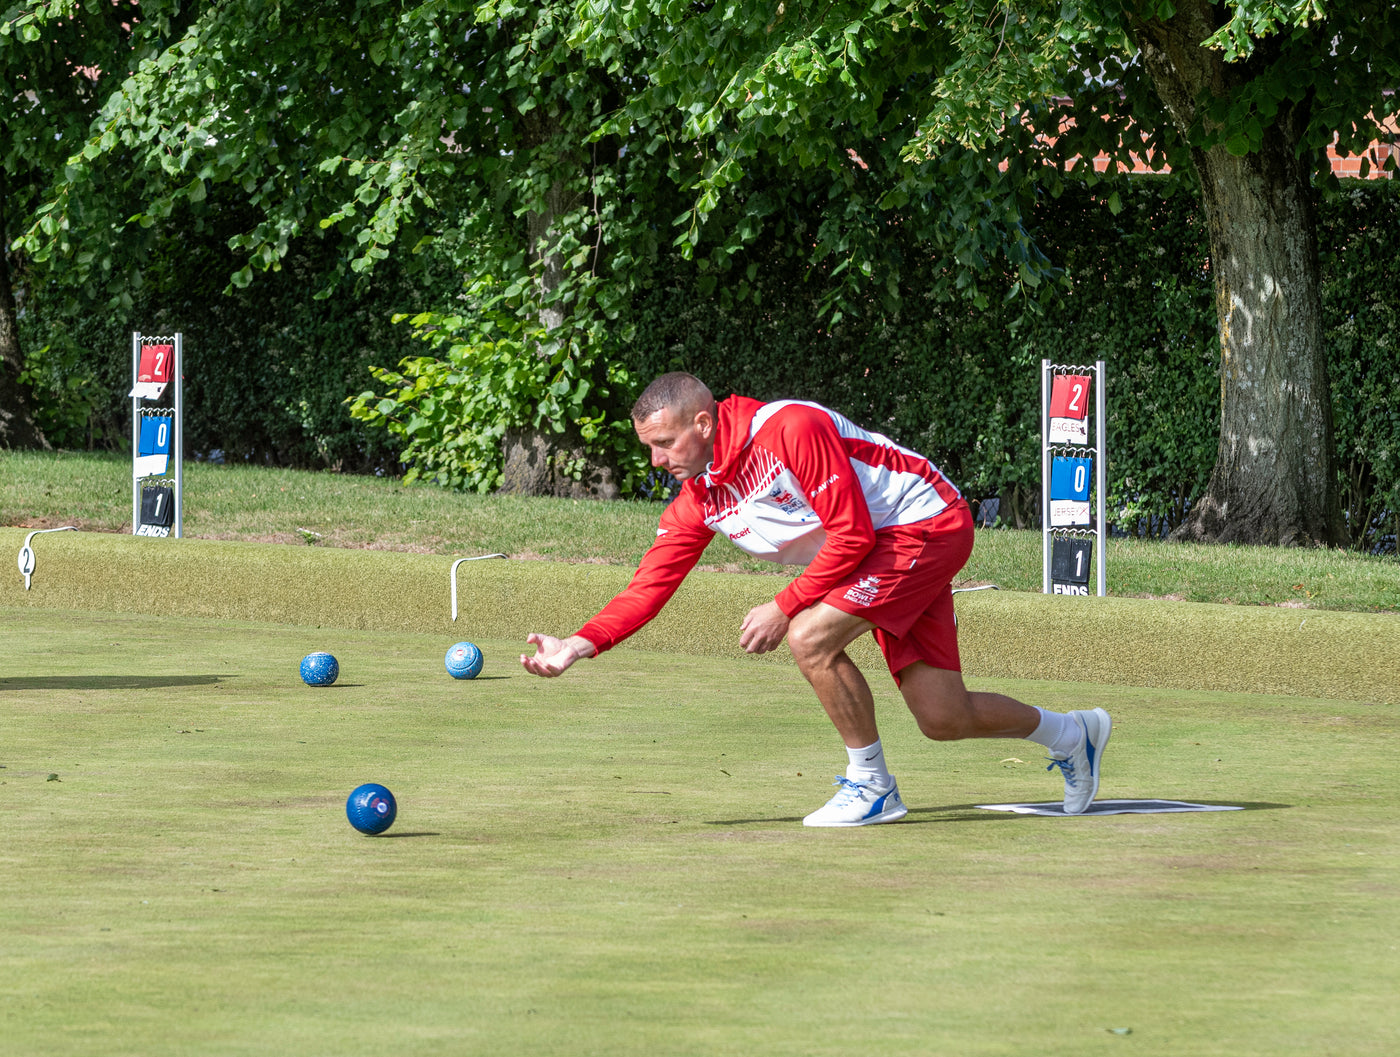 Bowls England Apparel and Merchandise